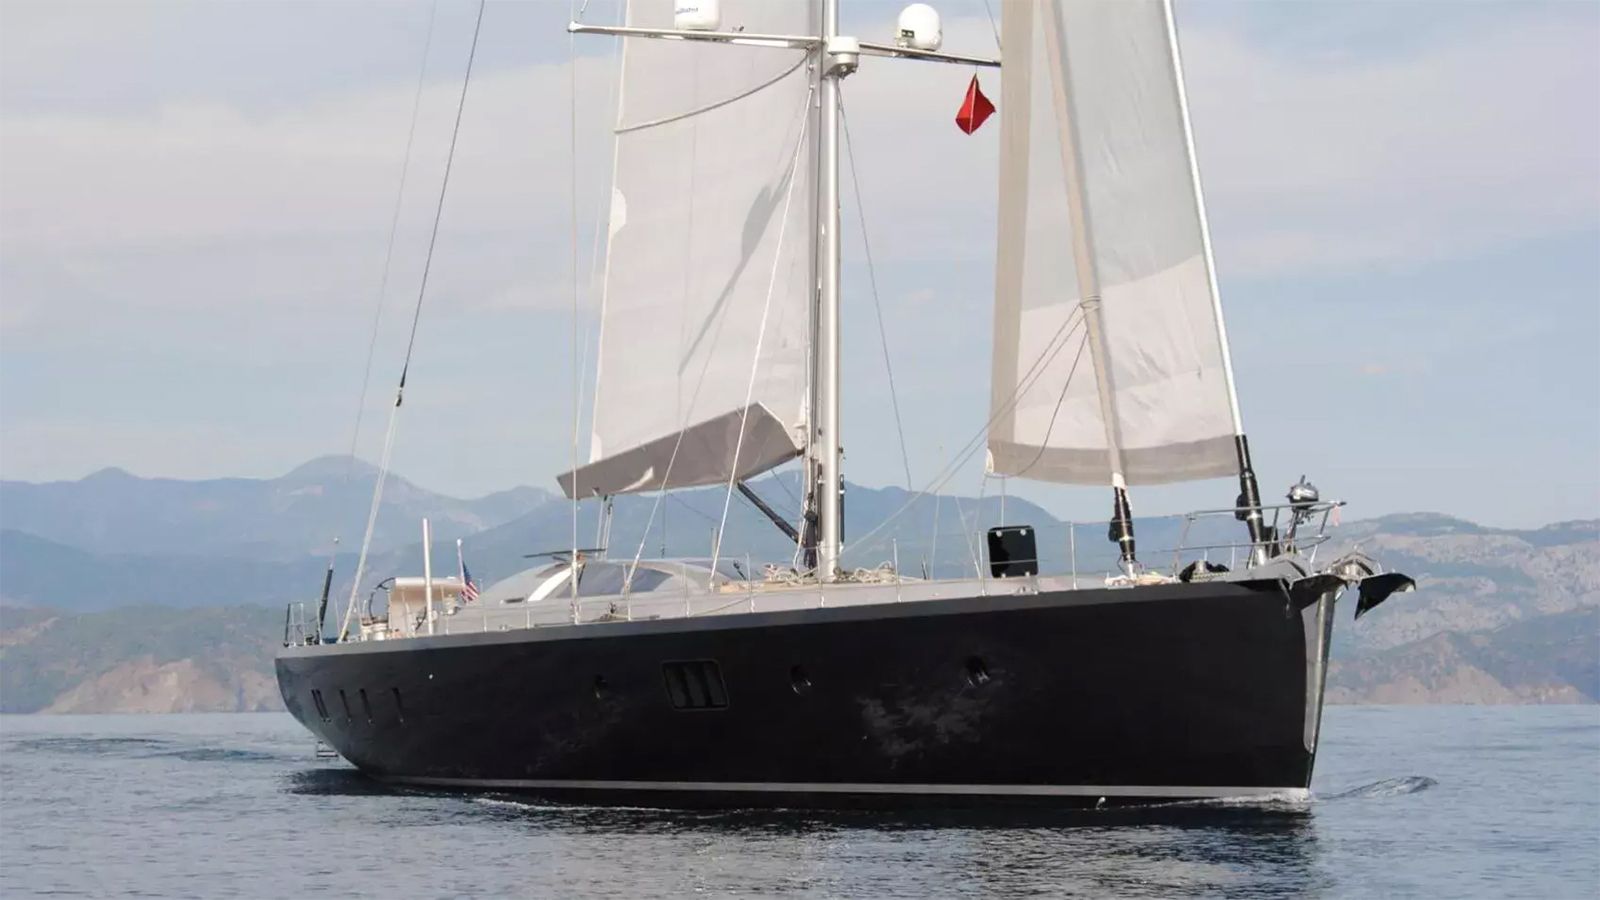 113' 11''/34.7m Aydos Yat MUSIC for Sale with IYC